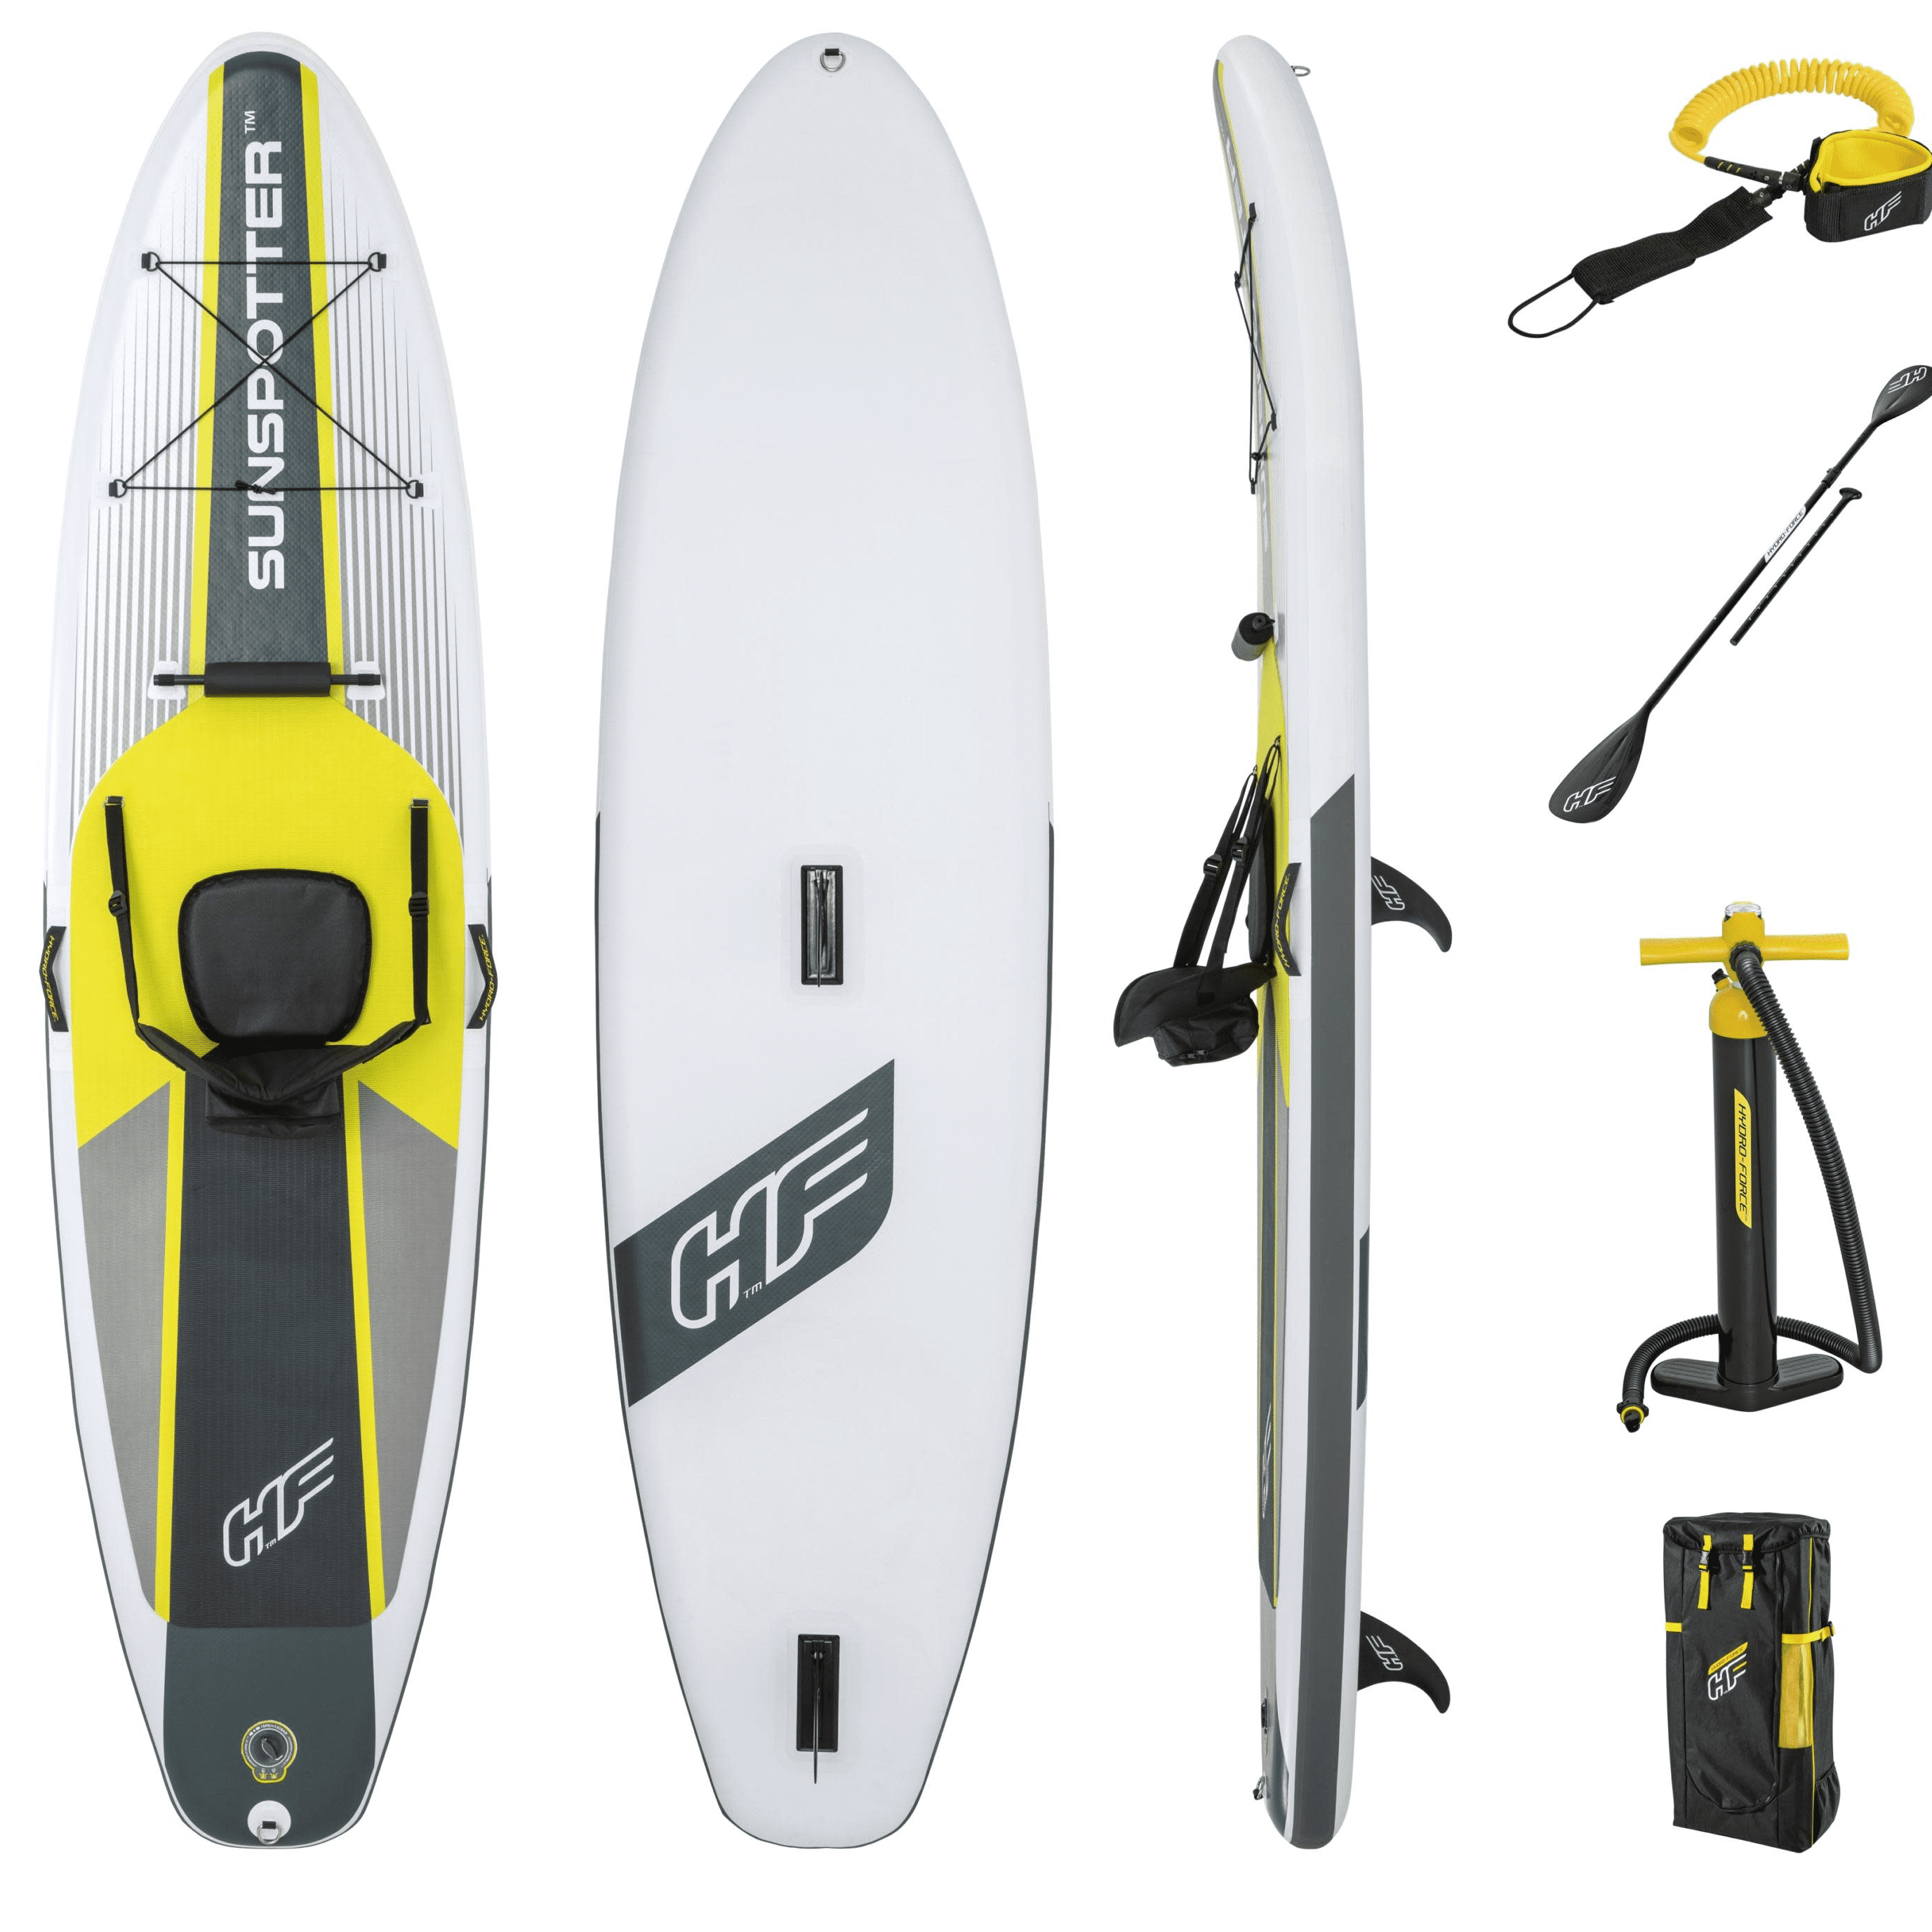 Bestway Hydro-Force Sunspotter SUP 11 Ft. 2 In. Inflatable 2 in 1 Stand Up Paddle Board and Kayak